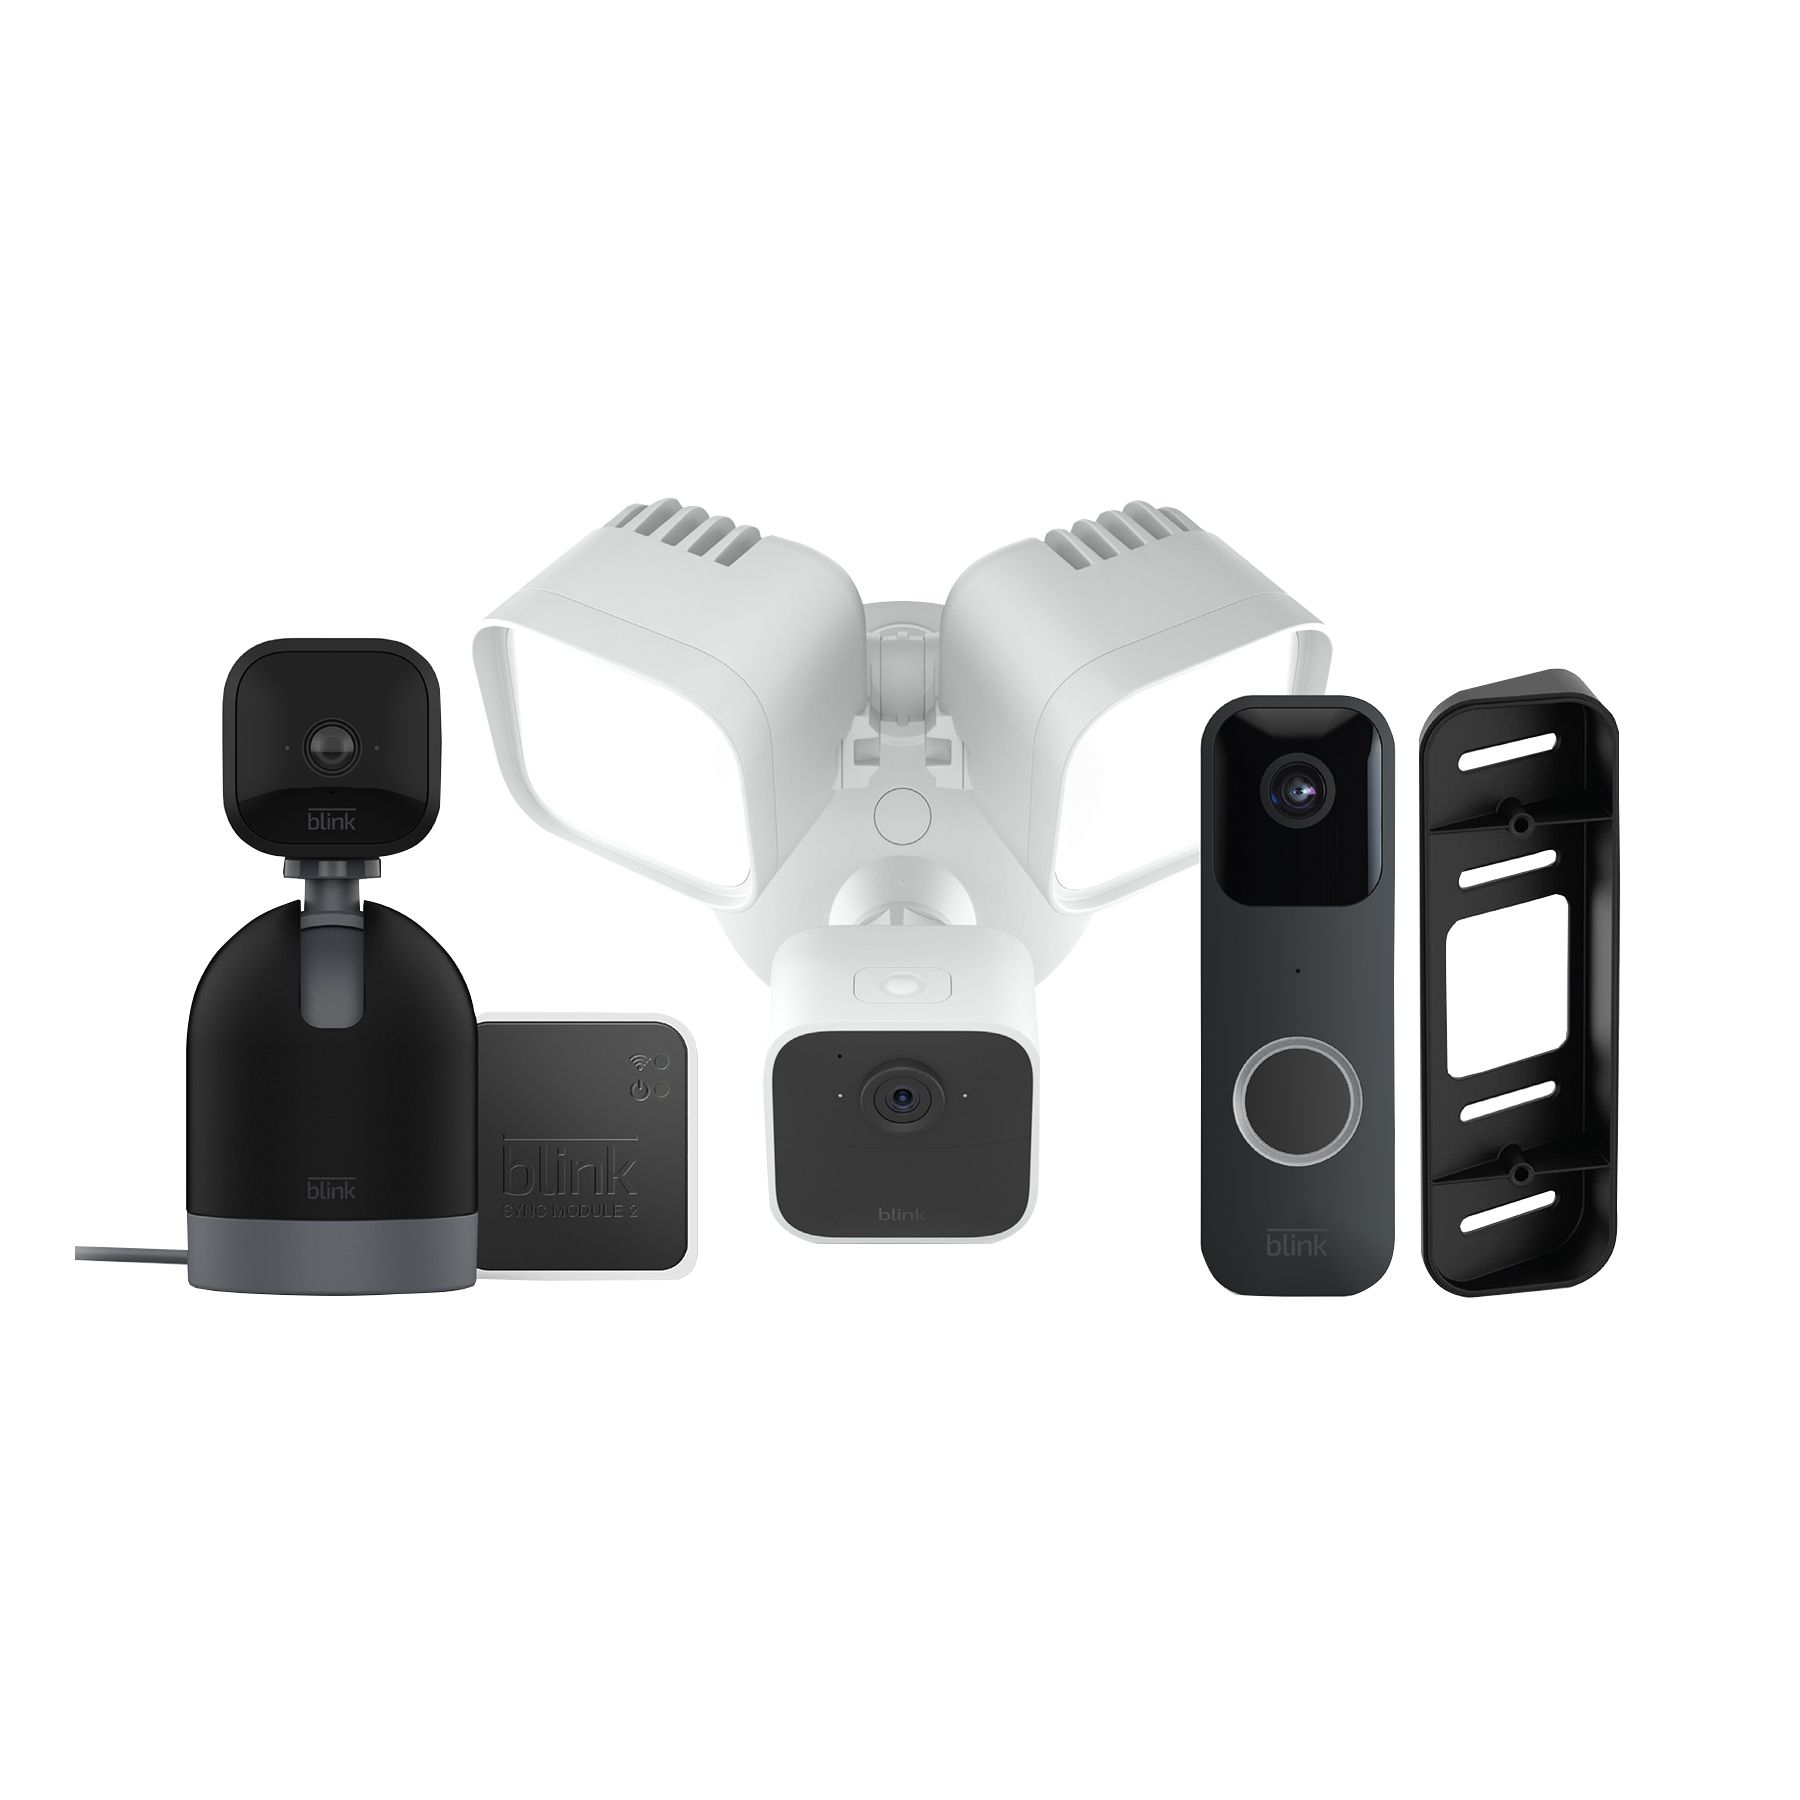  Blink Whole Home Bundle – Video Doorbell system (black),  Outdoor 4 camera (black), and Mini camera (white)